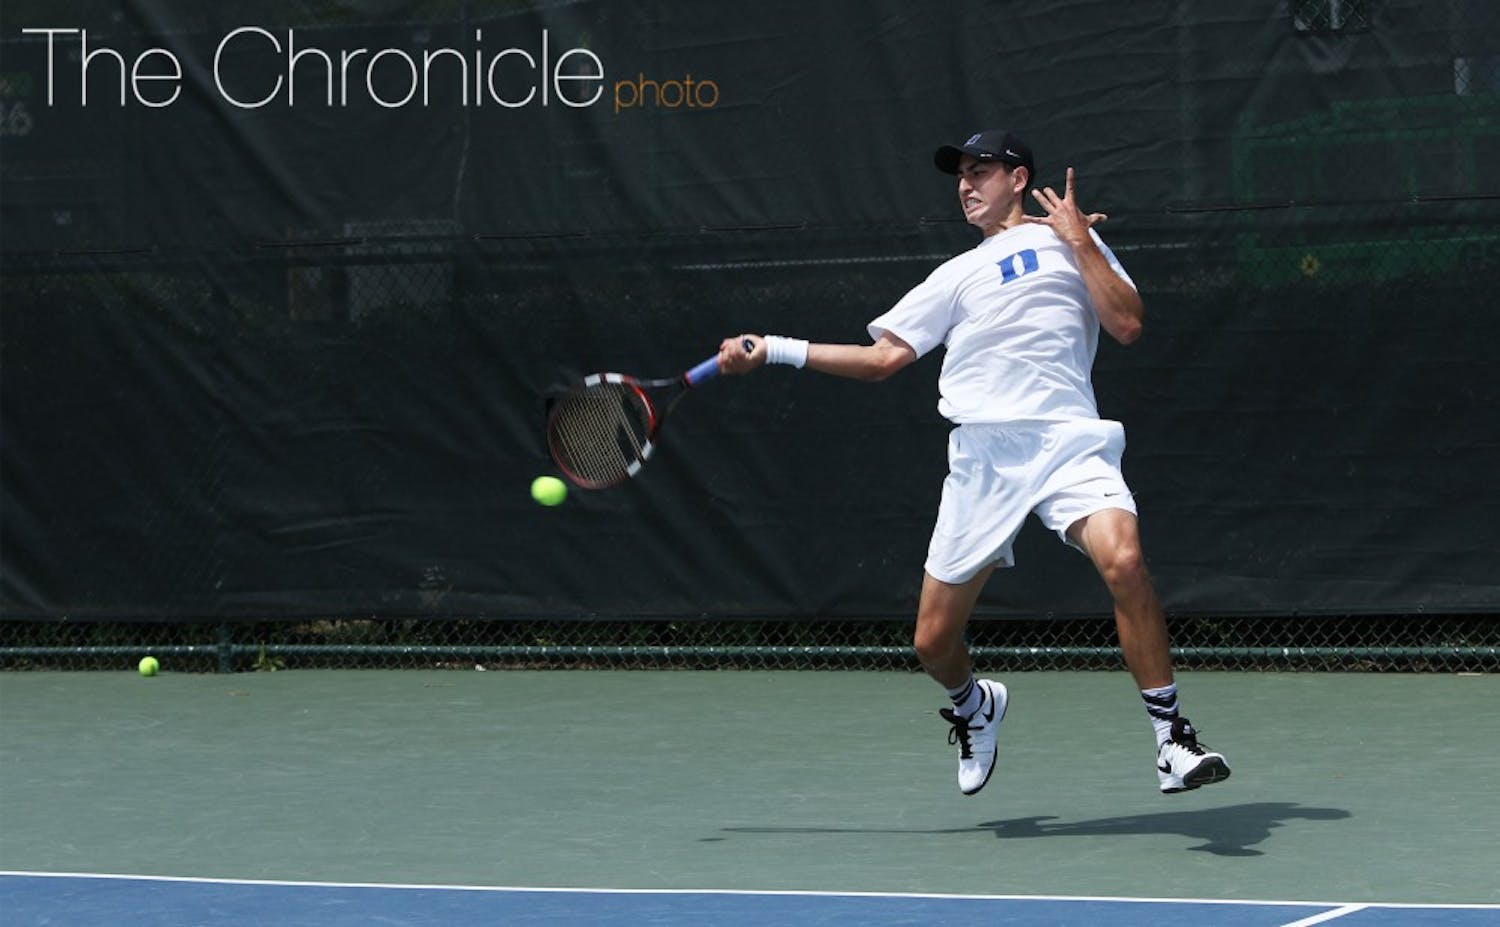 Junior Nicolas Alvarez will make his Duke season debut against some of the top singles players in the country.